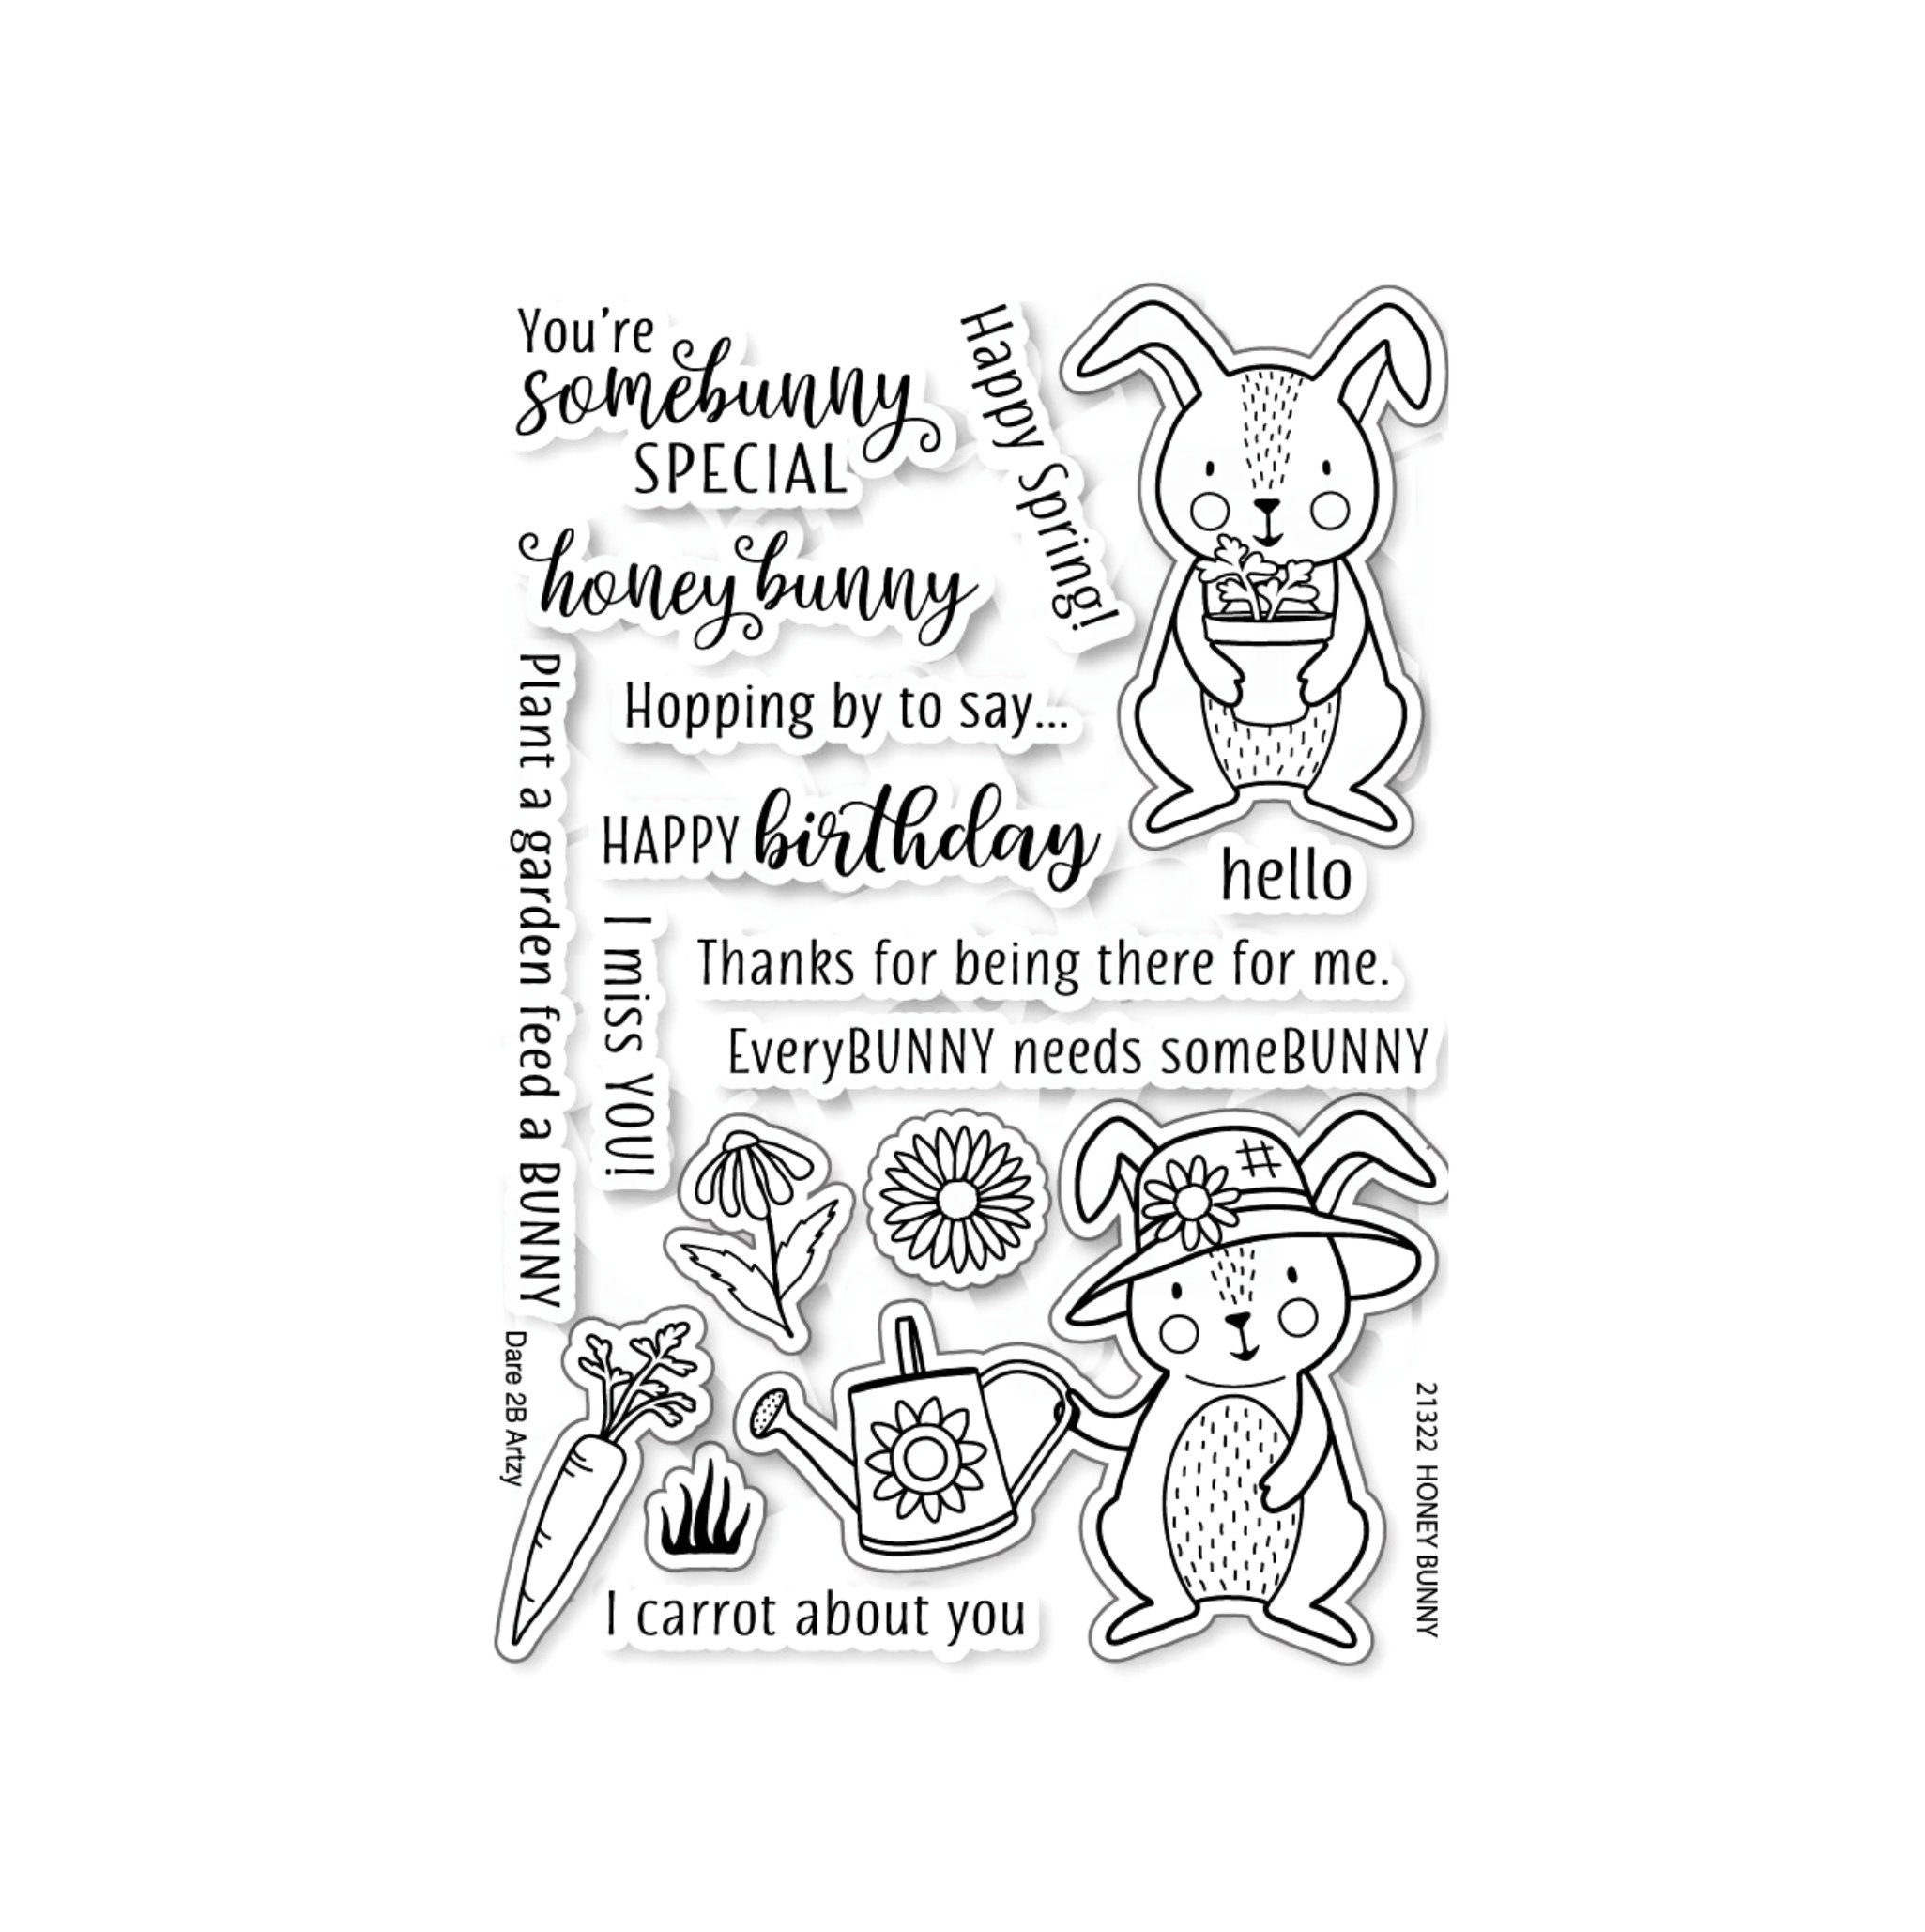 HELLO CLEAR STAMP-Impression Obsession/IO Stamps-Stamping Craft-Sentiment 